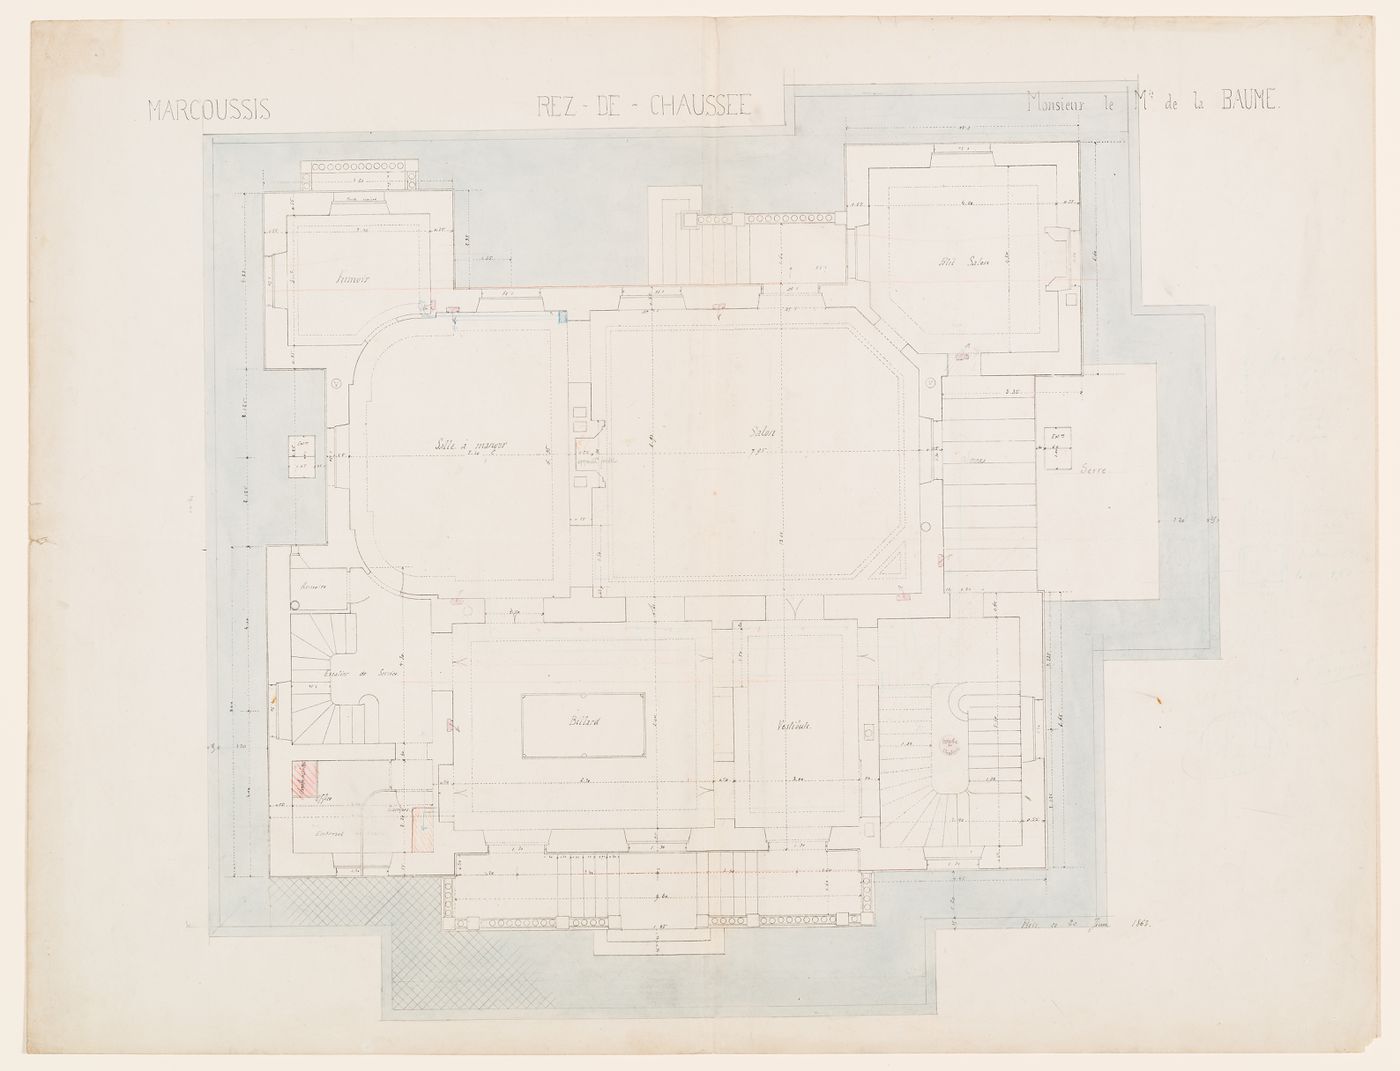 Château de Marcoussis: Ground floor plan, possibly showing the foundation